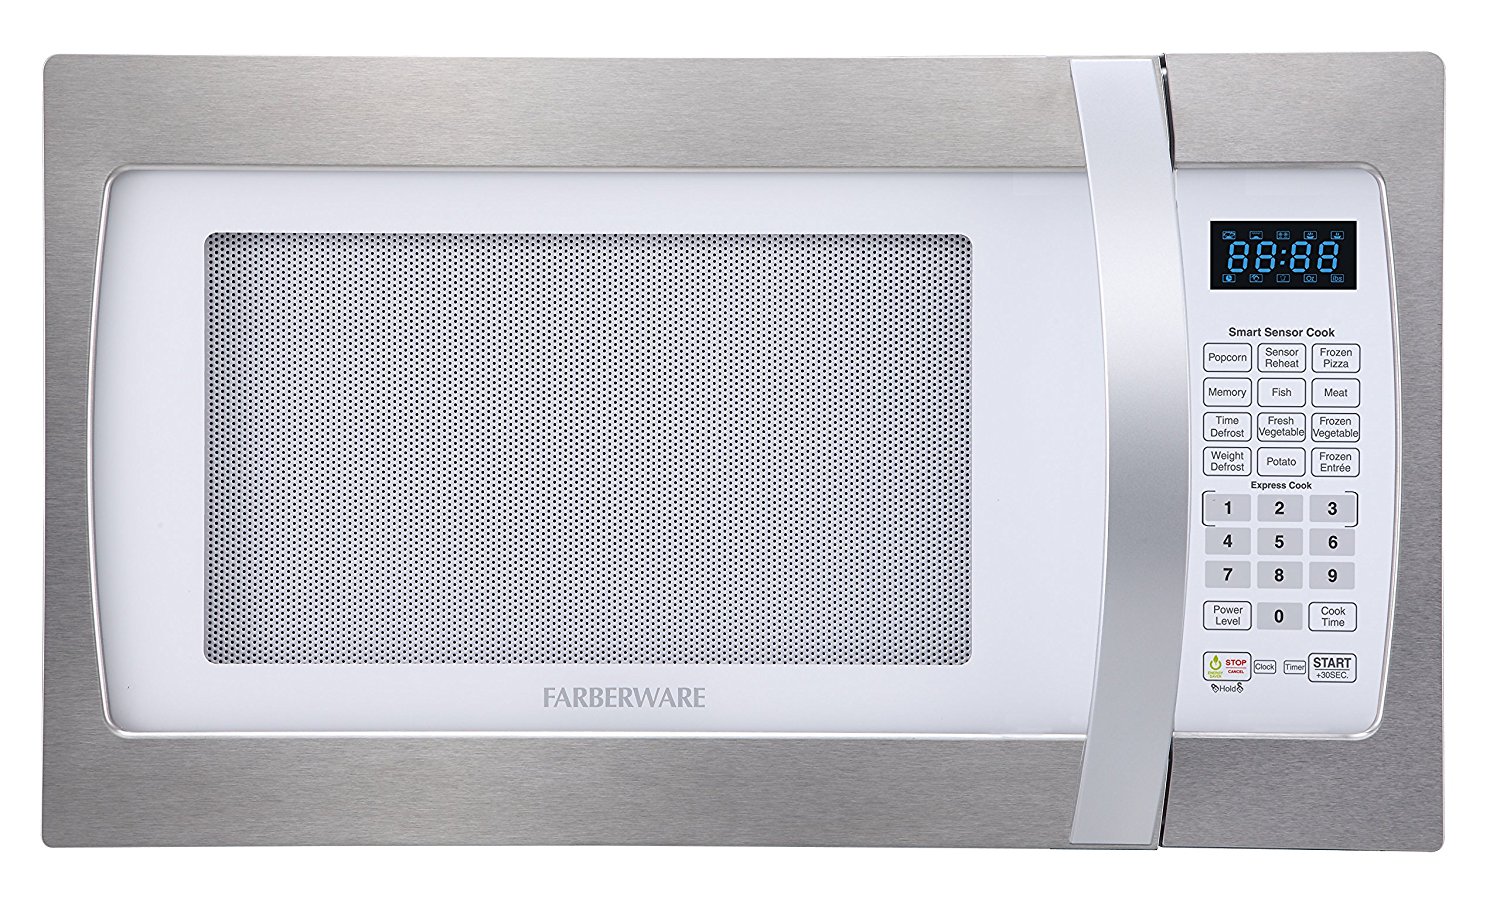 Farberware Professional FMO13AHTPLE 1.3 Cubic Foot 1100-Watt Microwave Oven with Sensor Cooking, White/Platinum